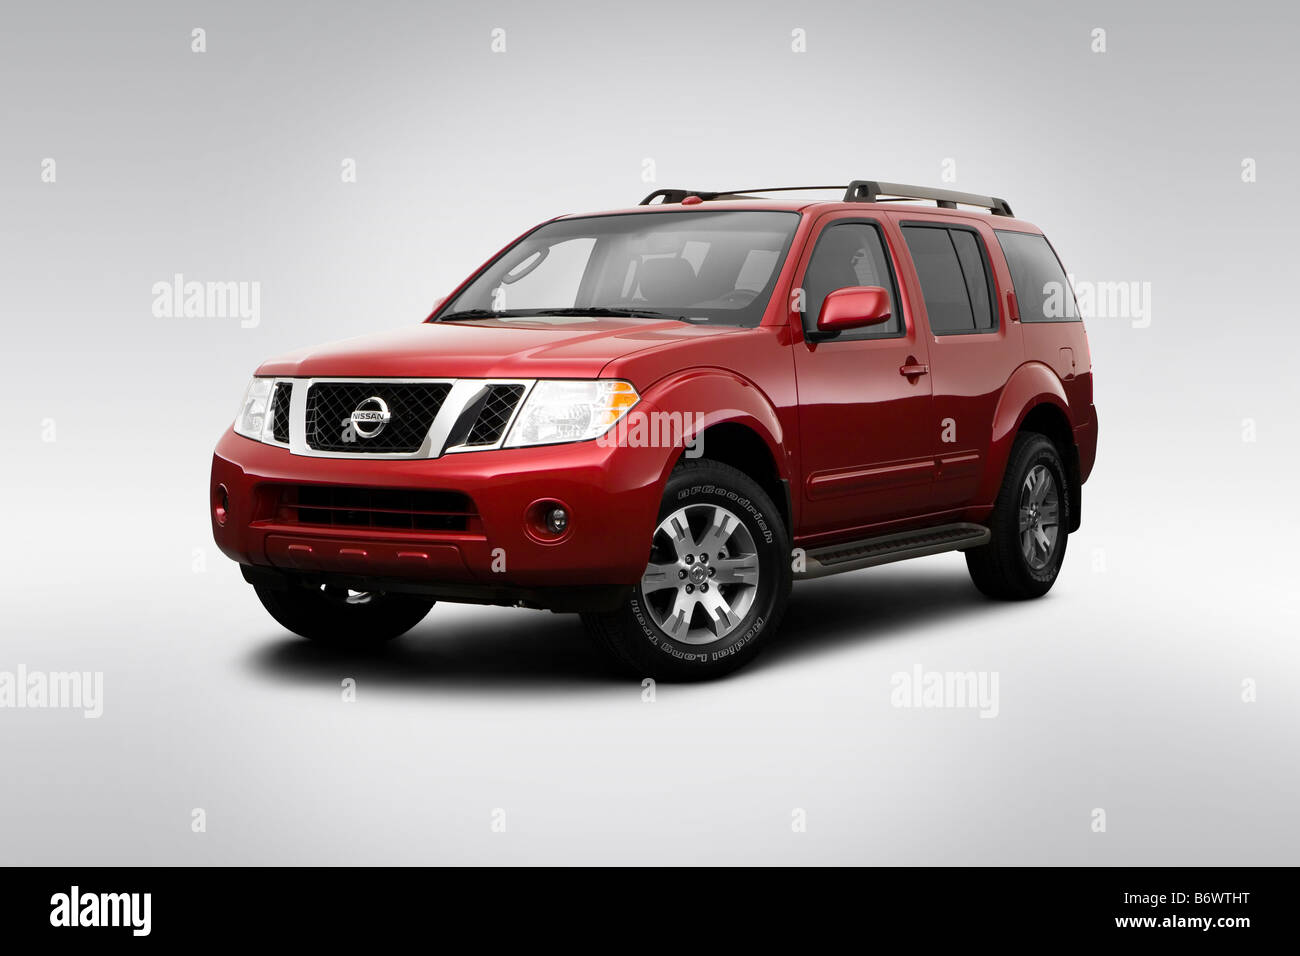 2009 Nissan Pathfinder SE in Red - Front angle view Stock Photo